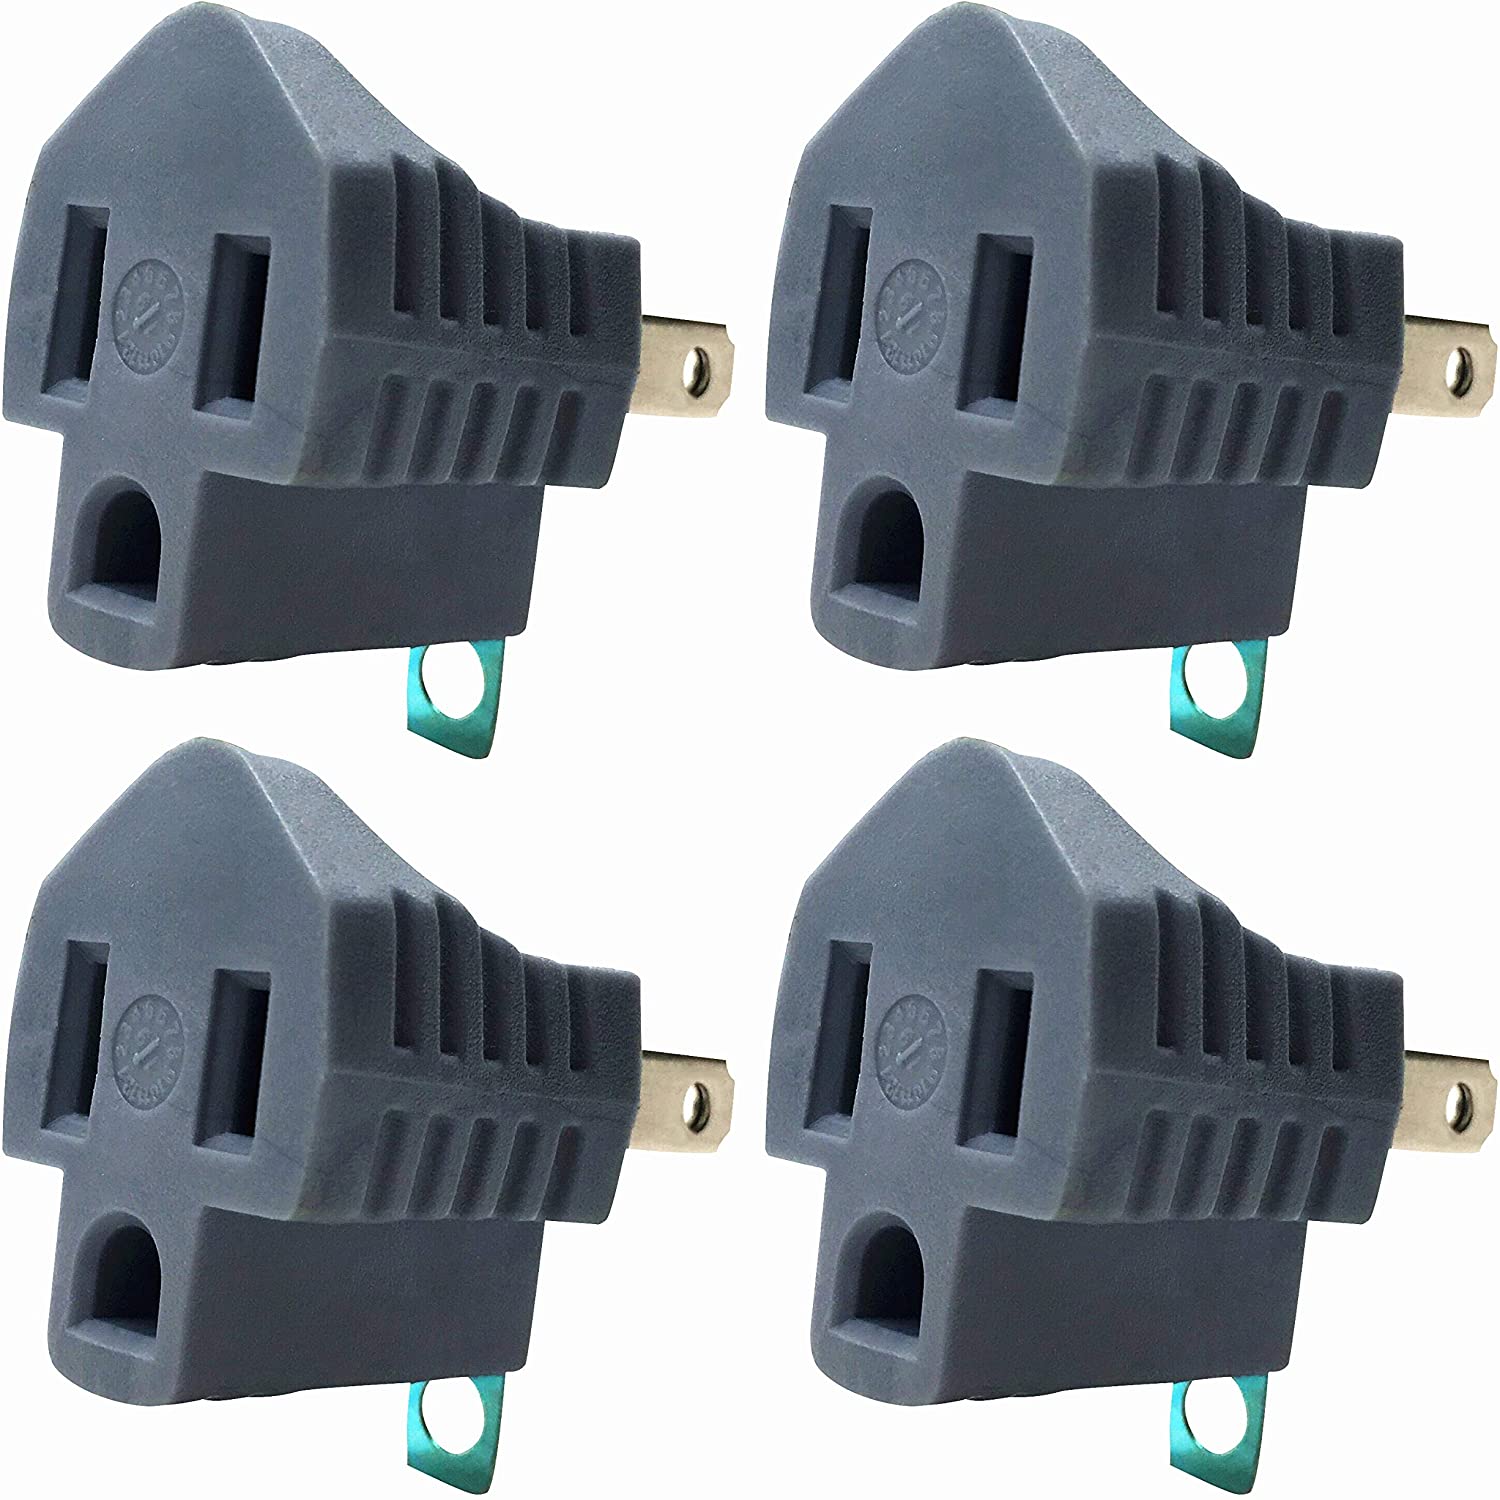 Oviitech Screw Clamp 3-To-2 Prong Plug Adapters, 4-Count